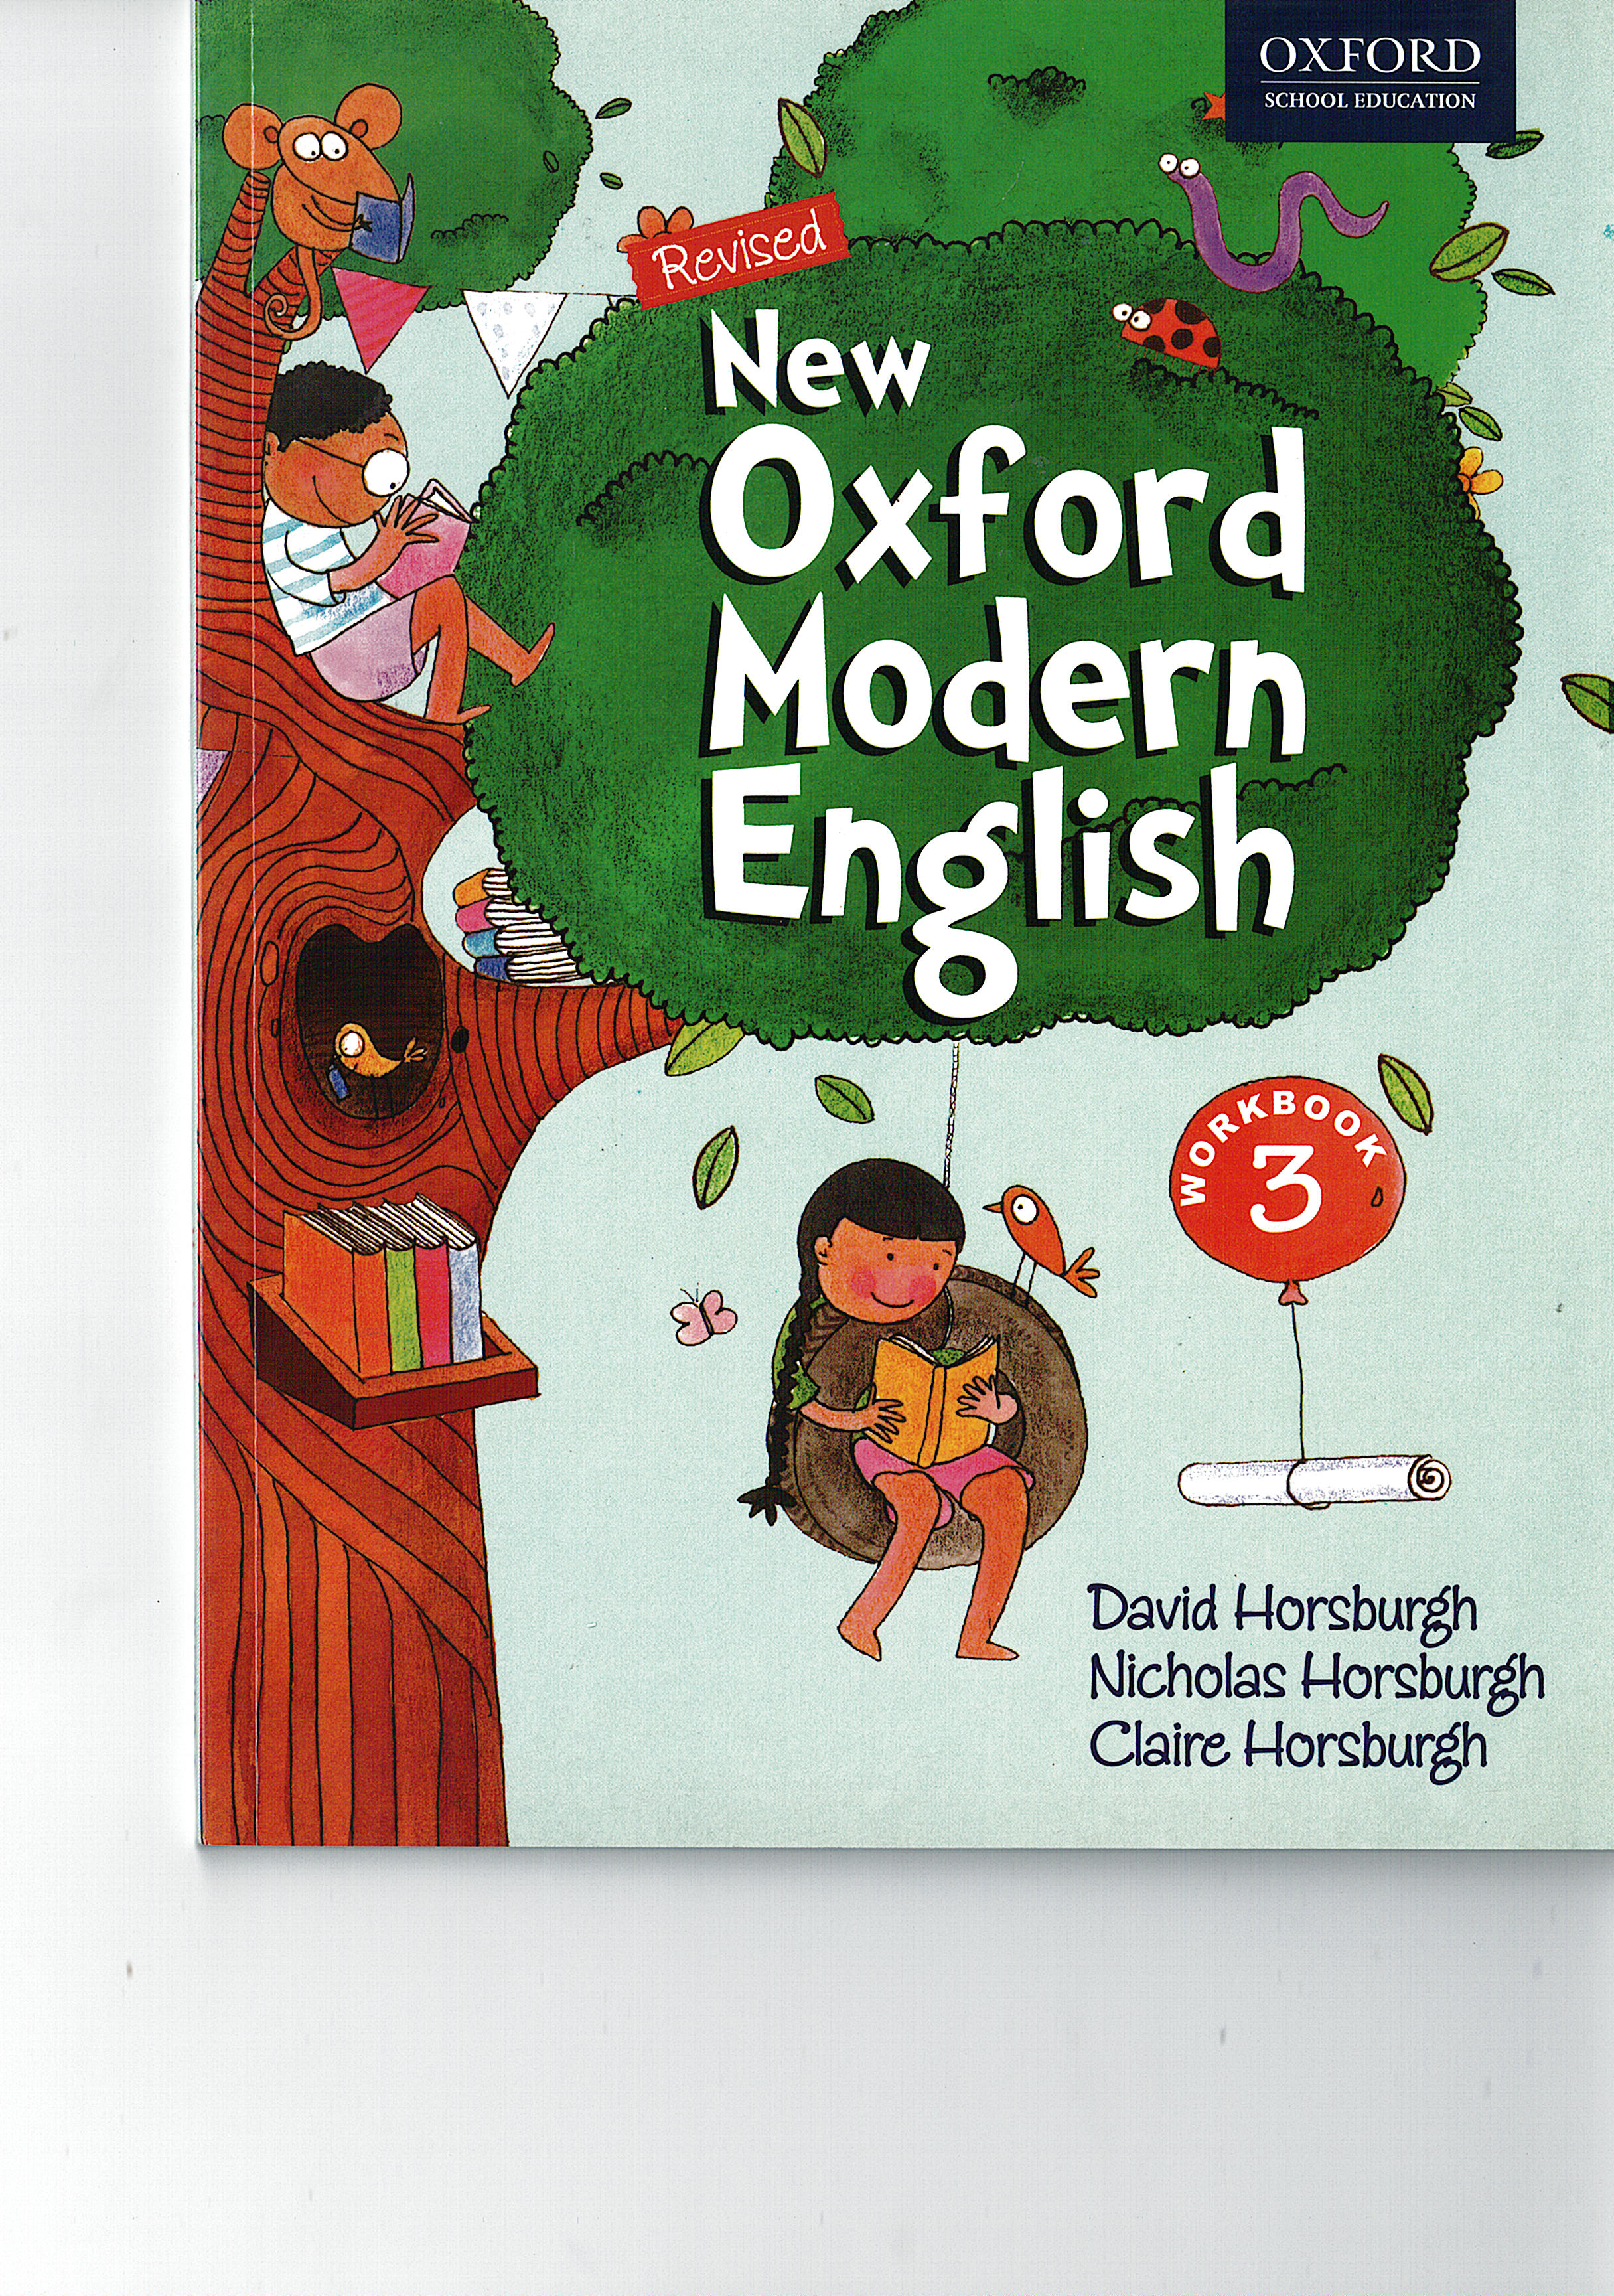 Revised New Oxford Modern English